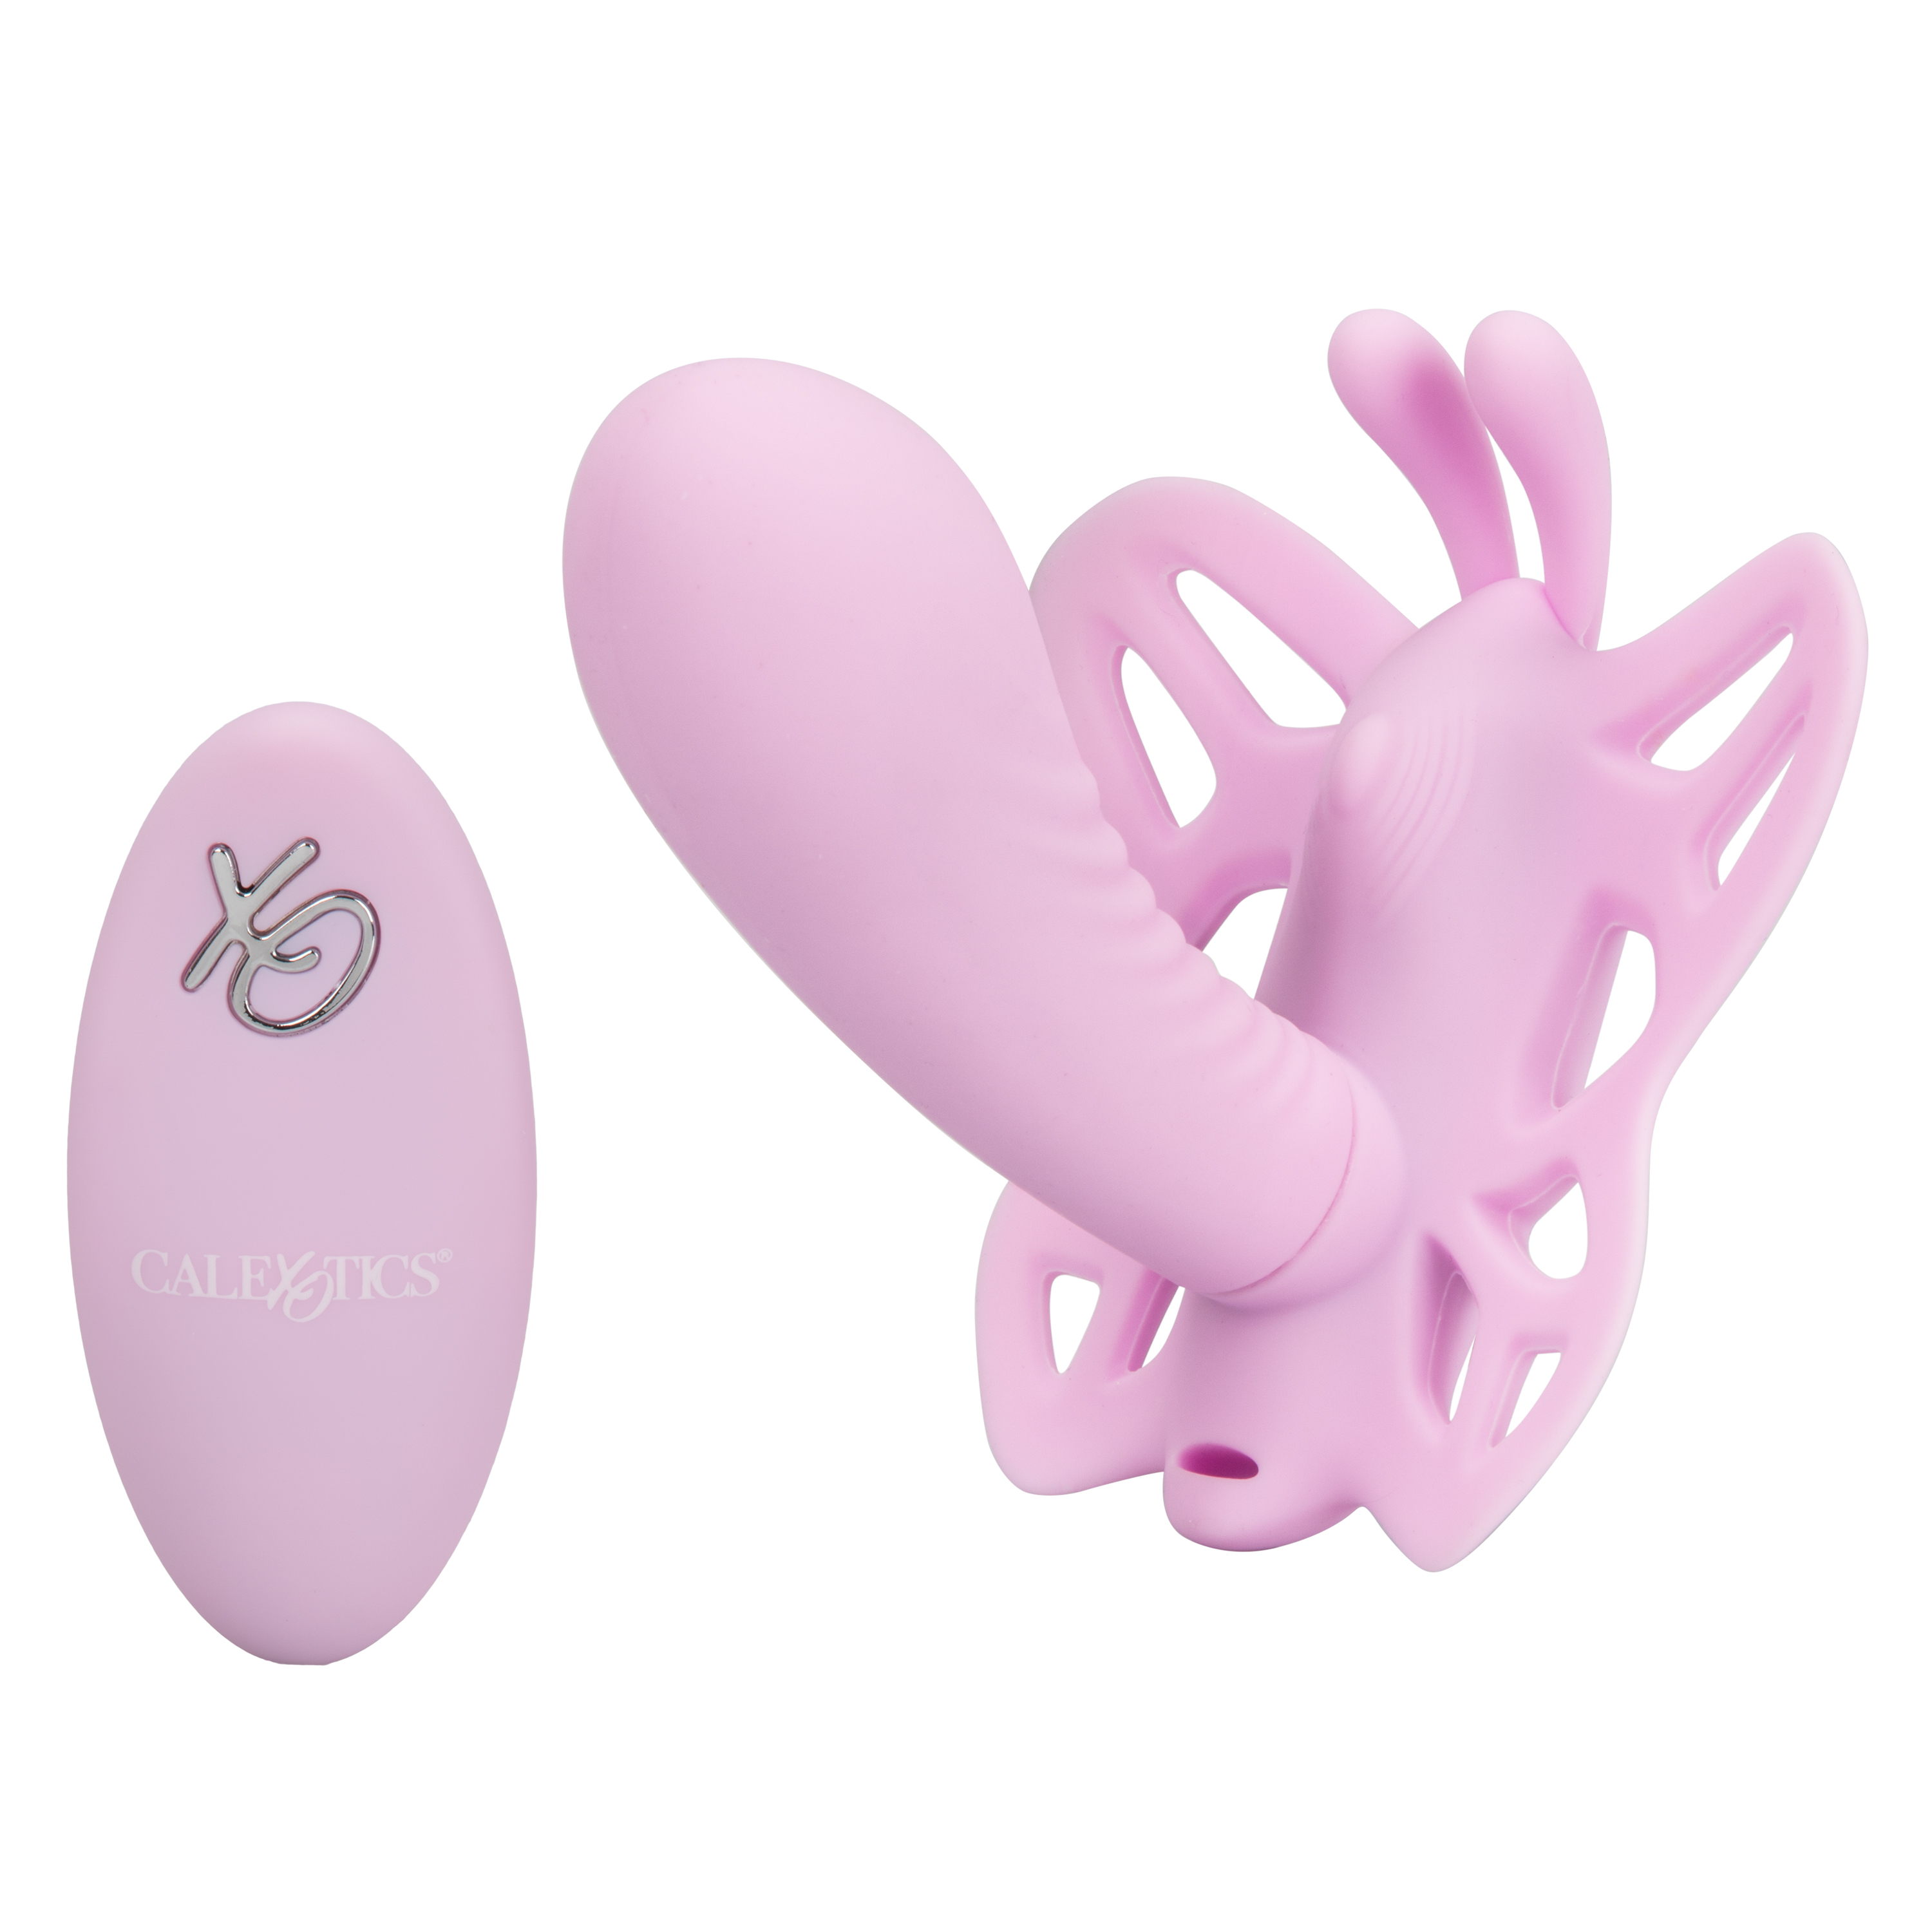 Venus+Butterfly+Silicone+Remote+Venus+G+USB+Rechargeable+Waterproof+Vibe